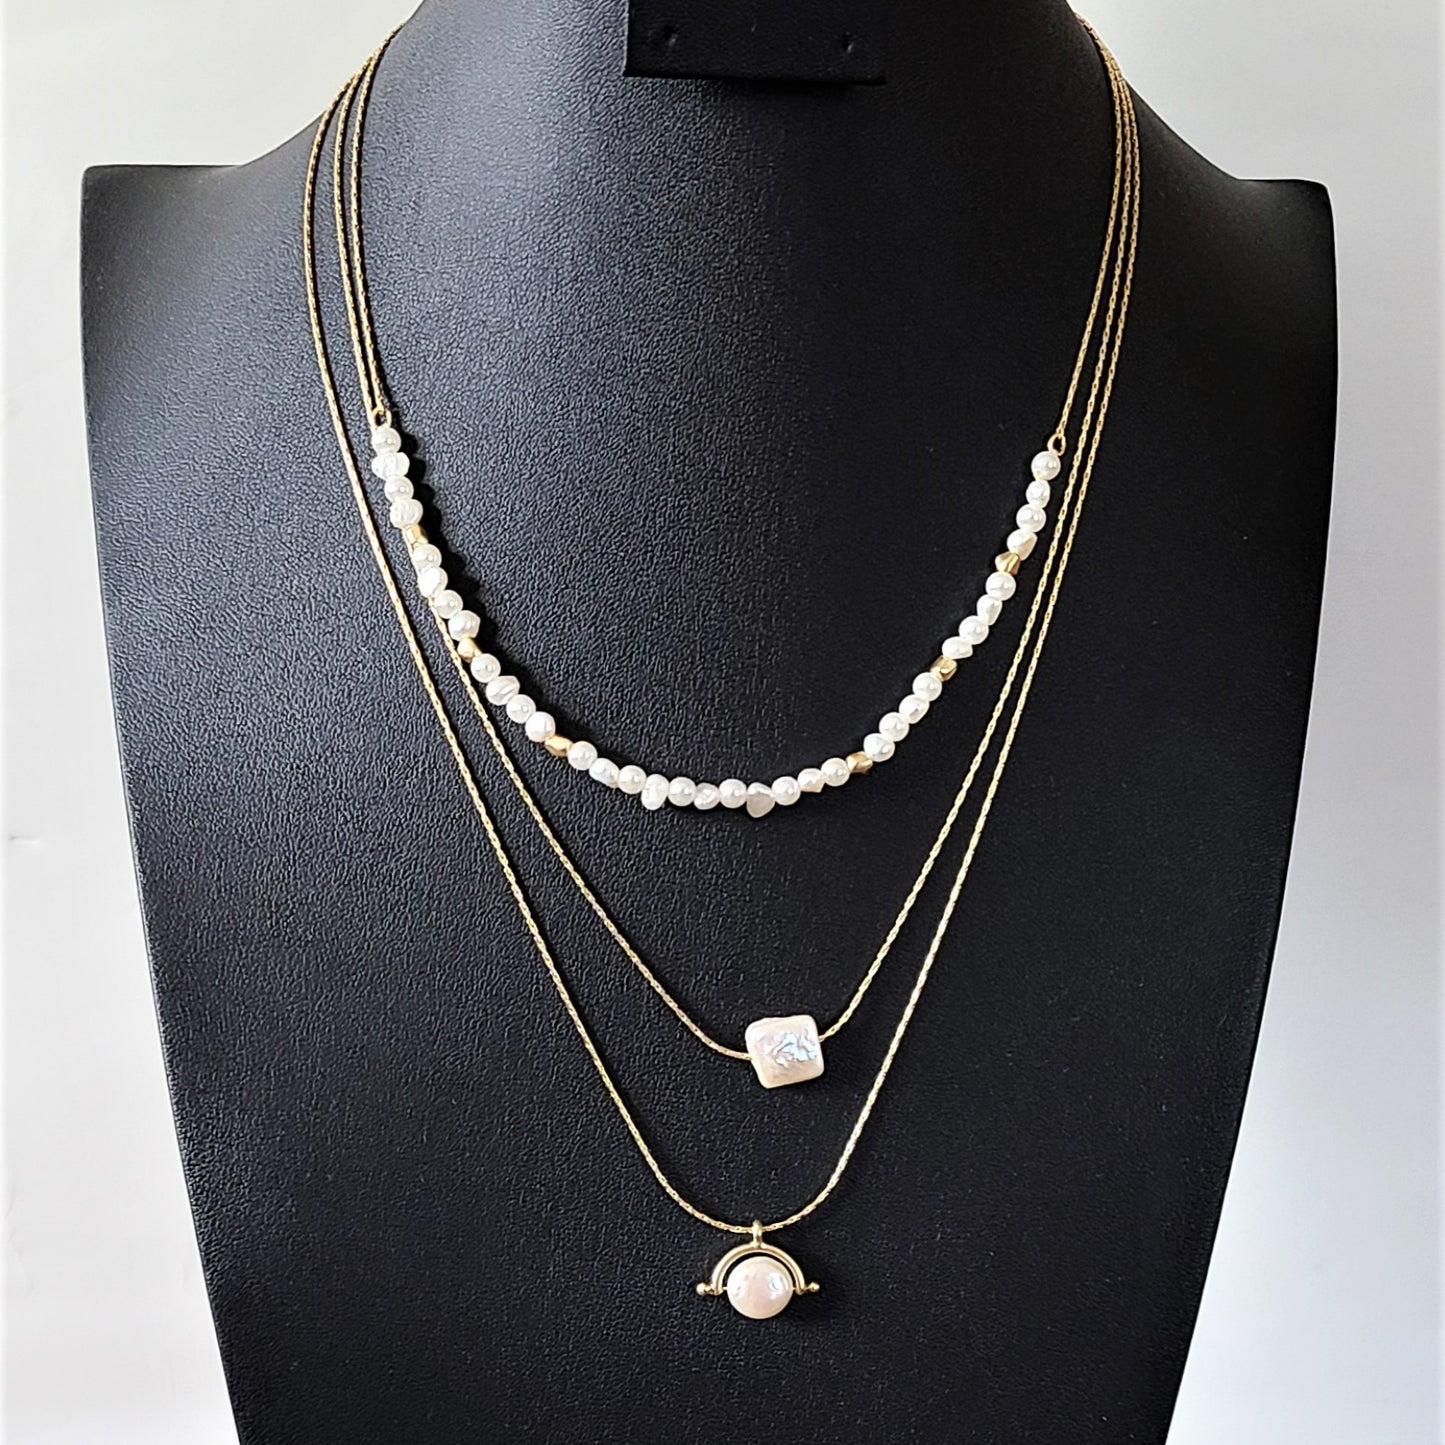 LUCKY BRAND Layered 3 Strand Pearl Gold Tone Pendant Necklace